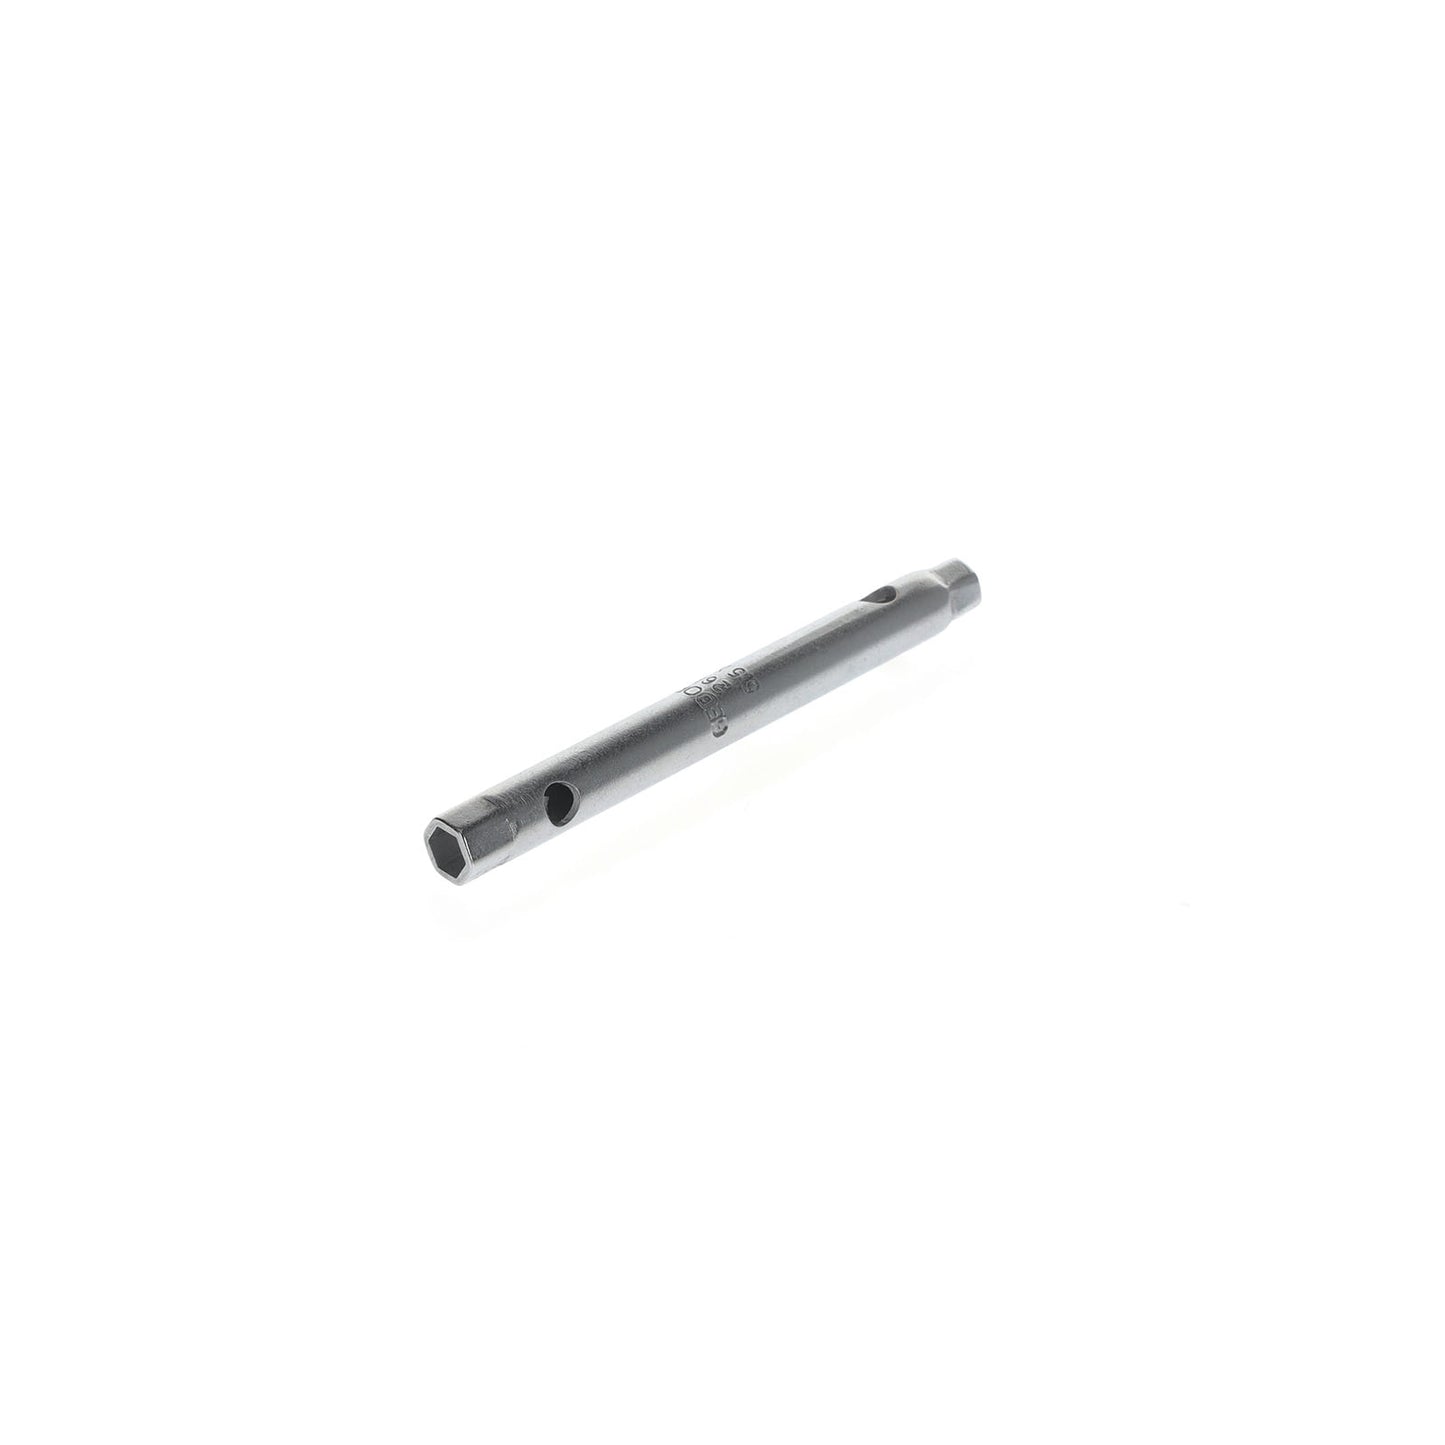 GEDORE 26 R 5.5X7 - Hollow Socket Wrench, 5.5x7 (6222810)